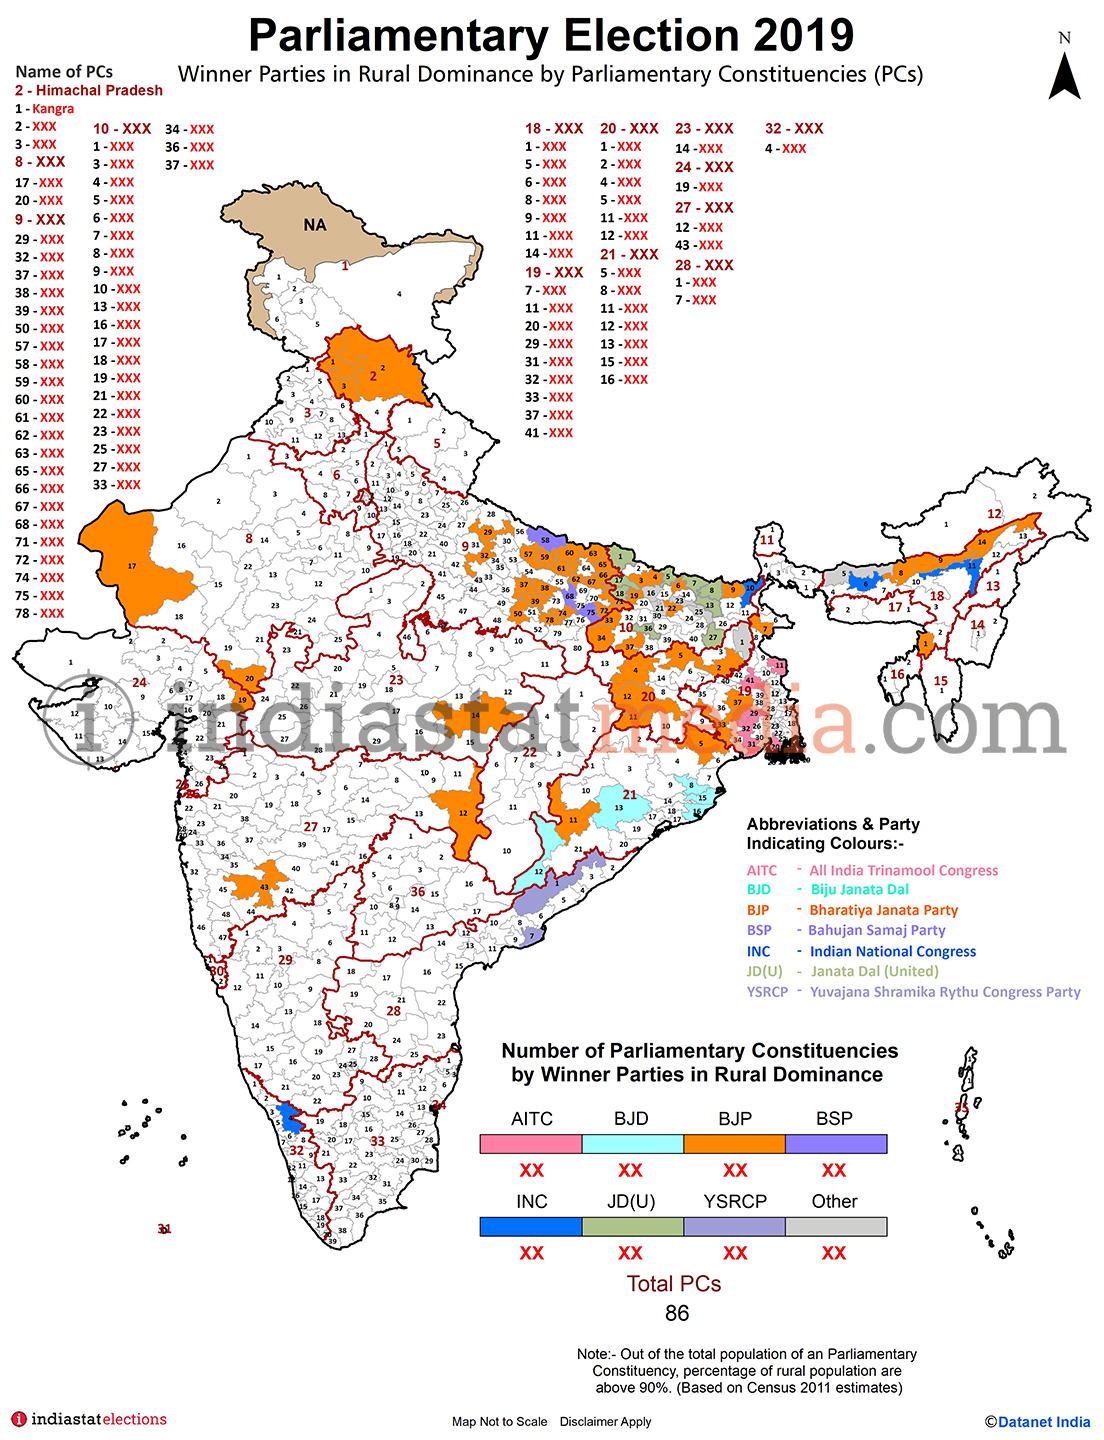 Winner Parties in Rural Dominance Parliamentary Constituencies in India (Parliamentary Election - 2019)